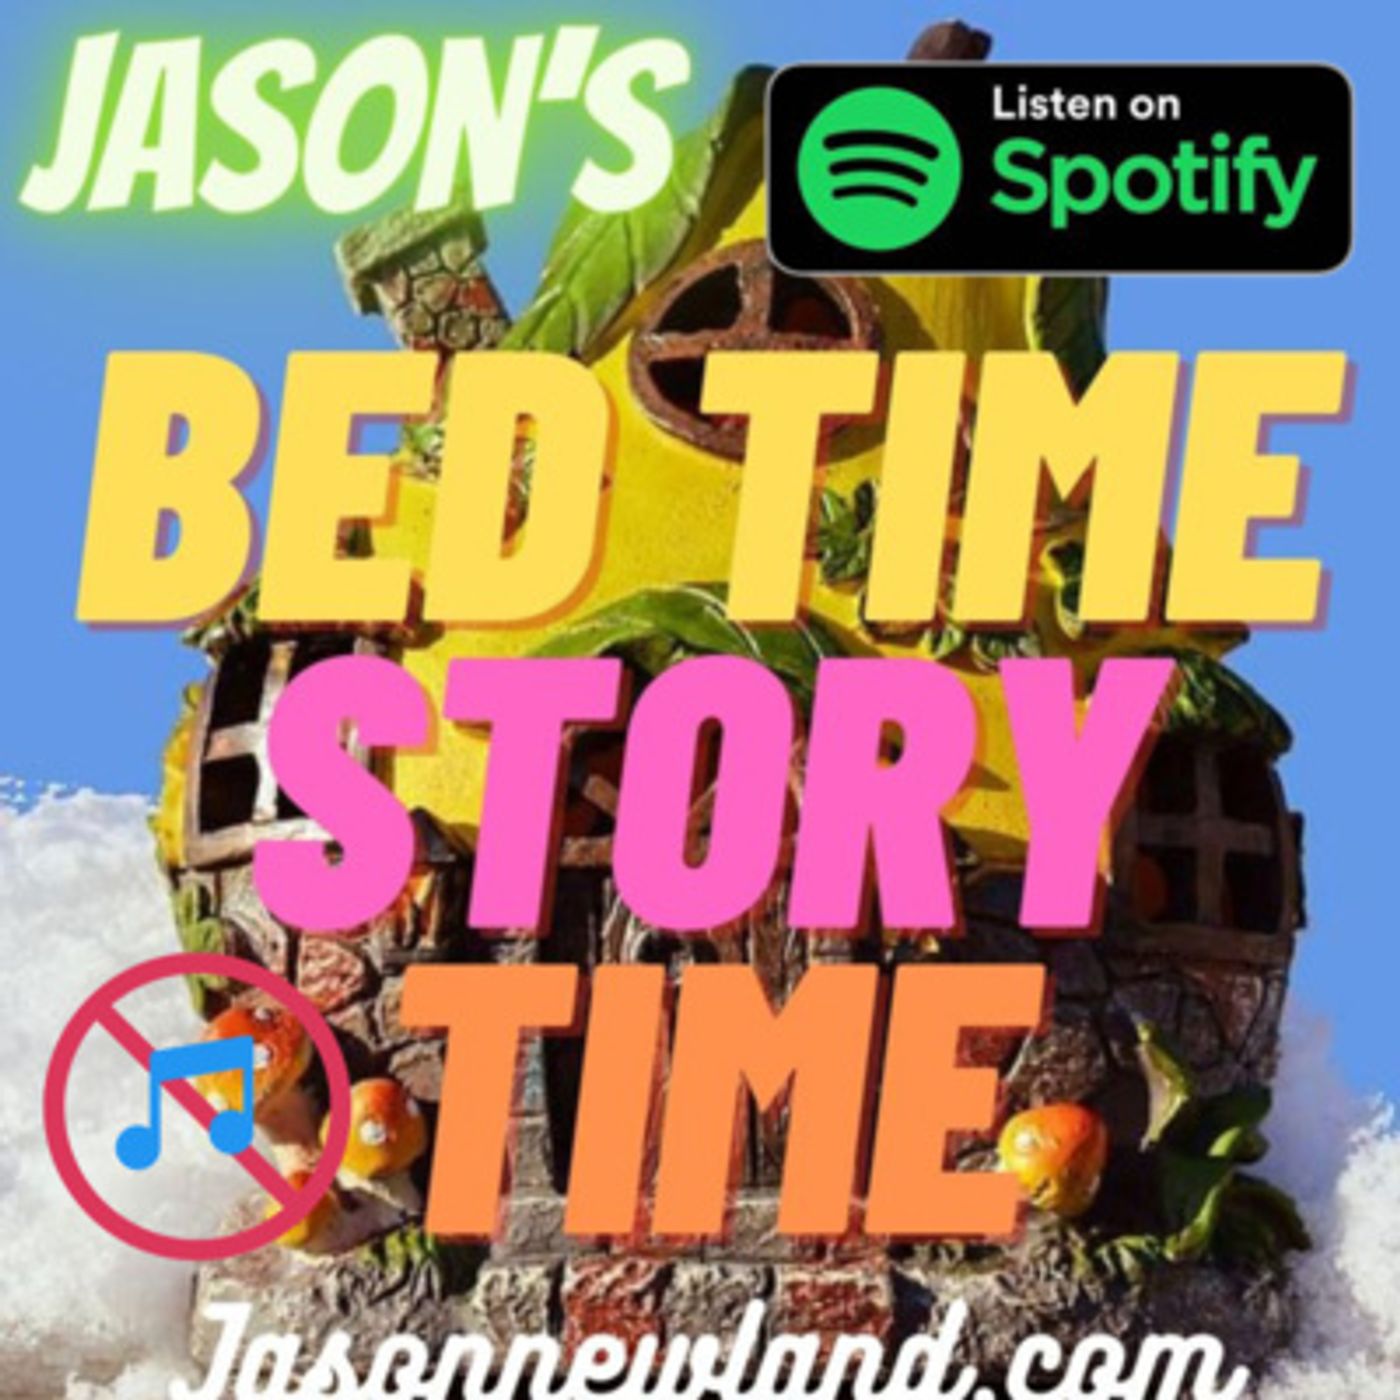 #13 THE GOLDEN SNAIL - Jasons Bed Time Story Time